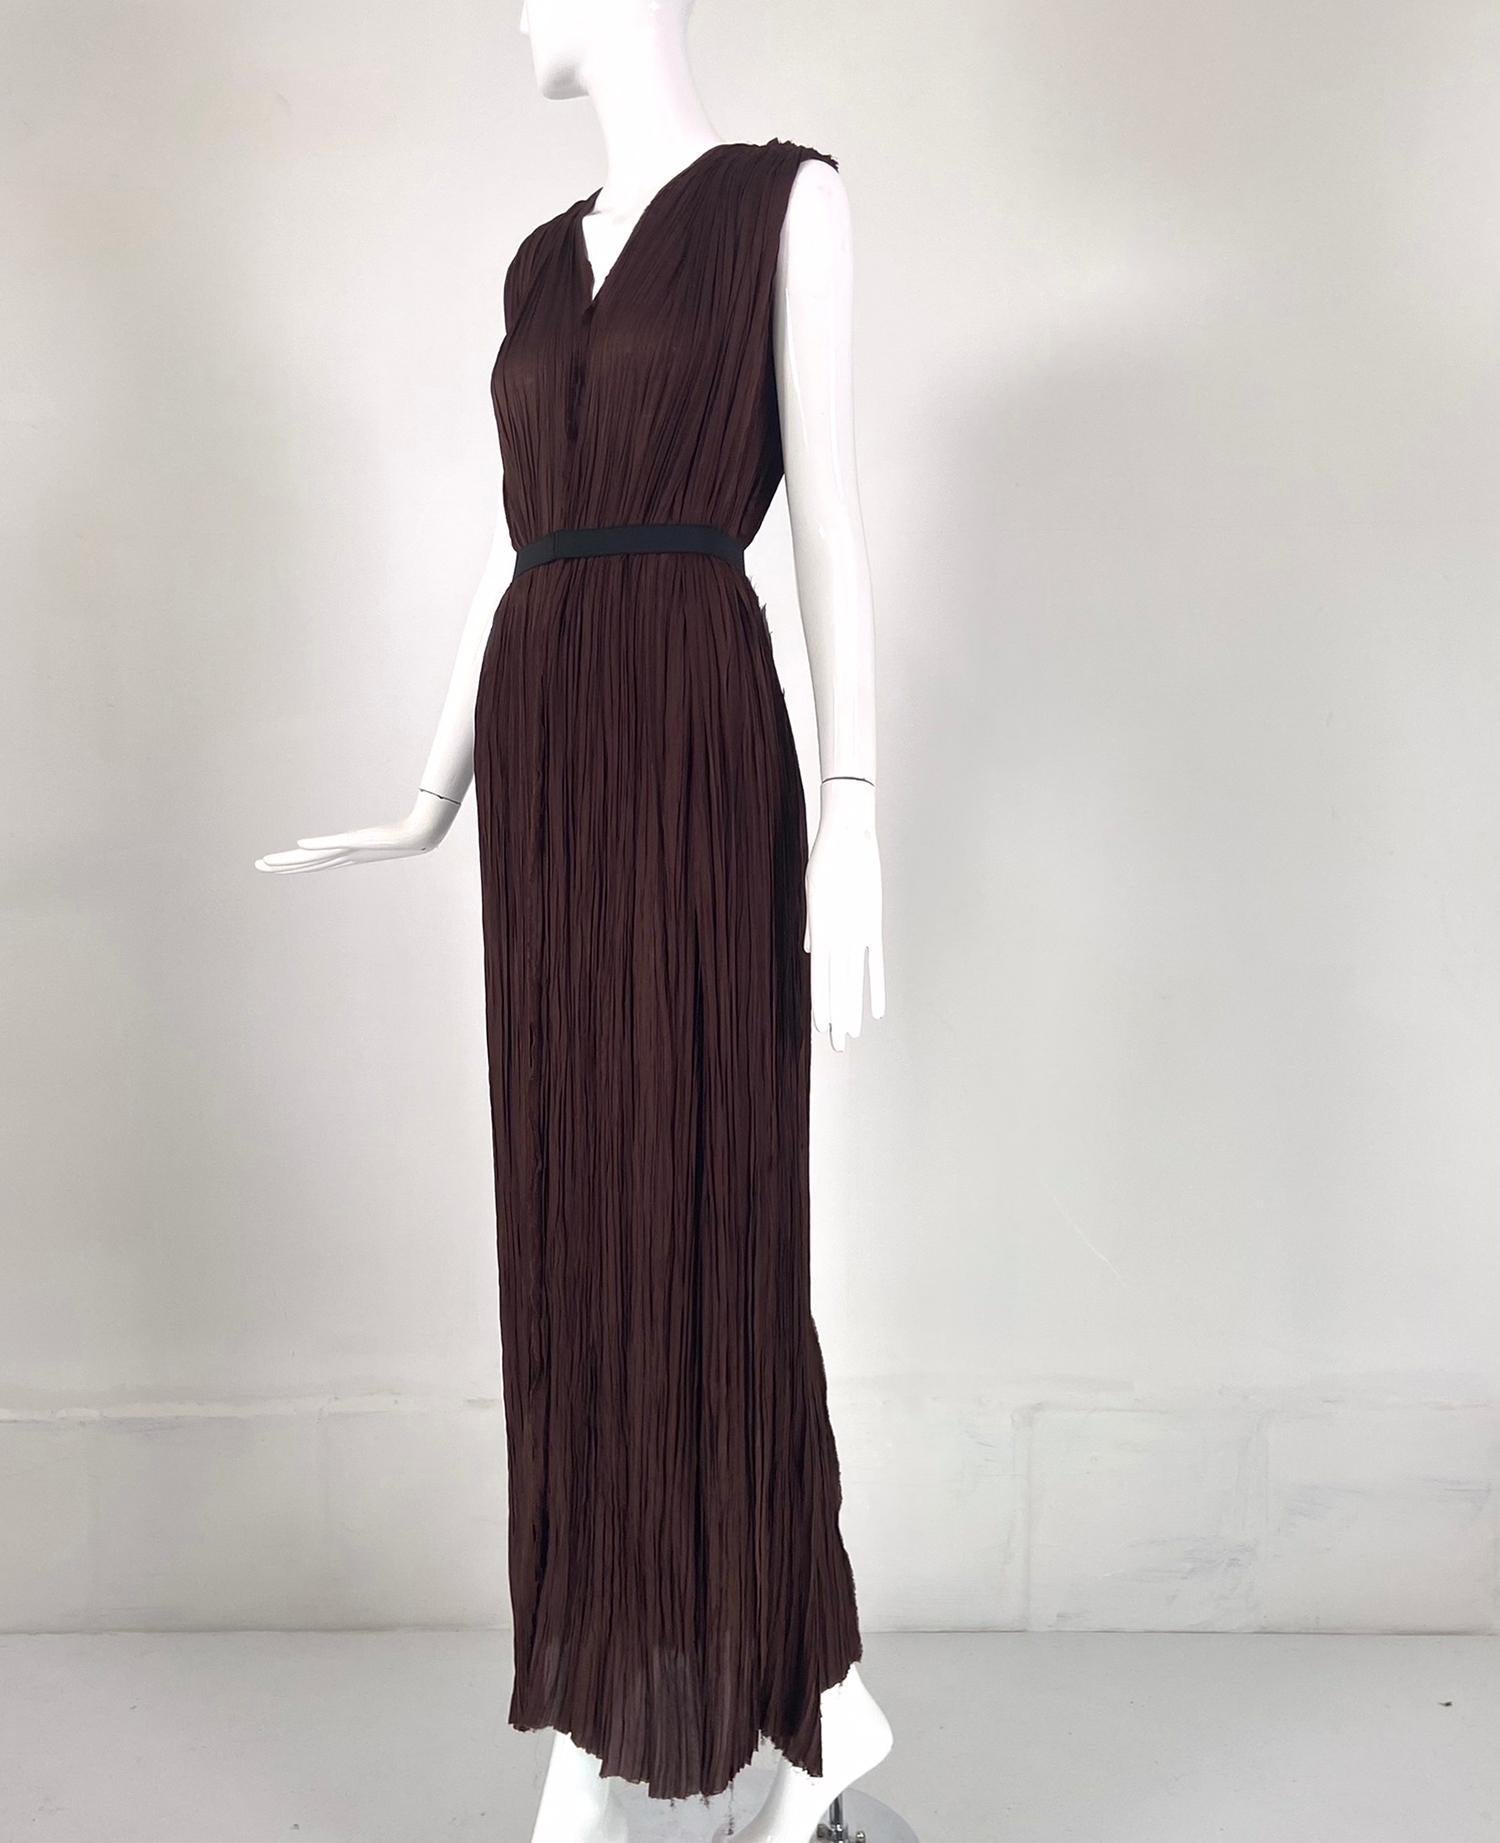 Lanvin Ete' 2005 Fortuny Pleated V Neck Maxi Dress Chocolate Brown Alber Elbaz 4